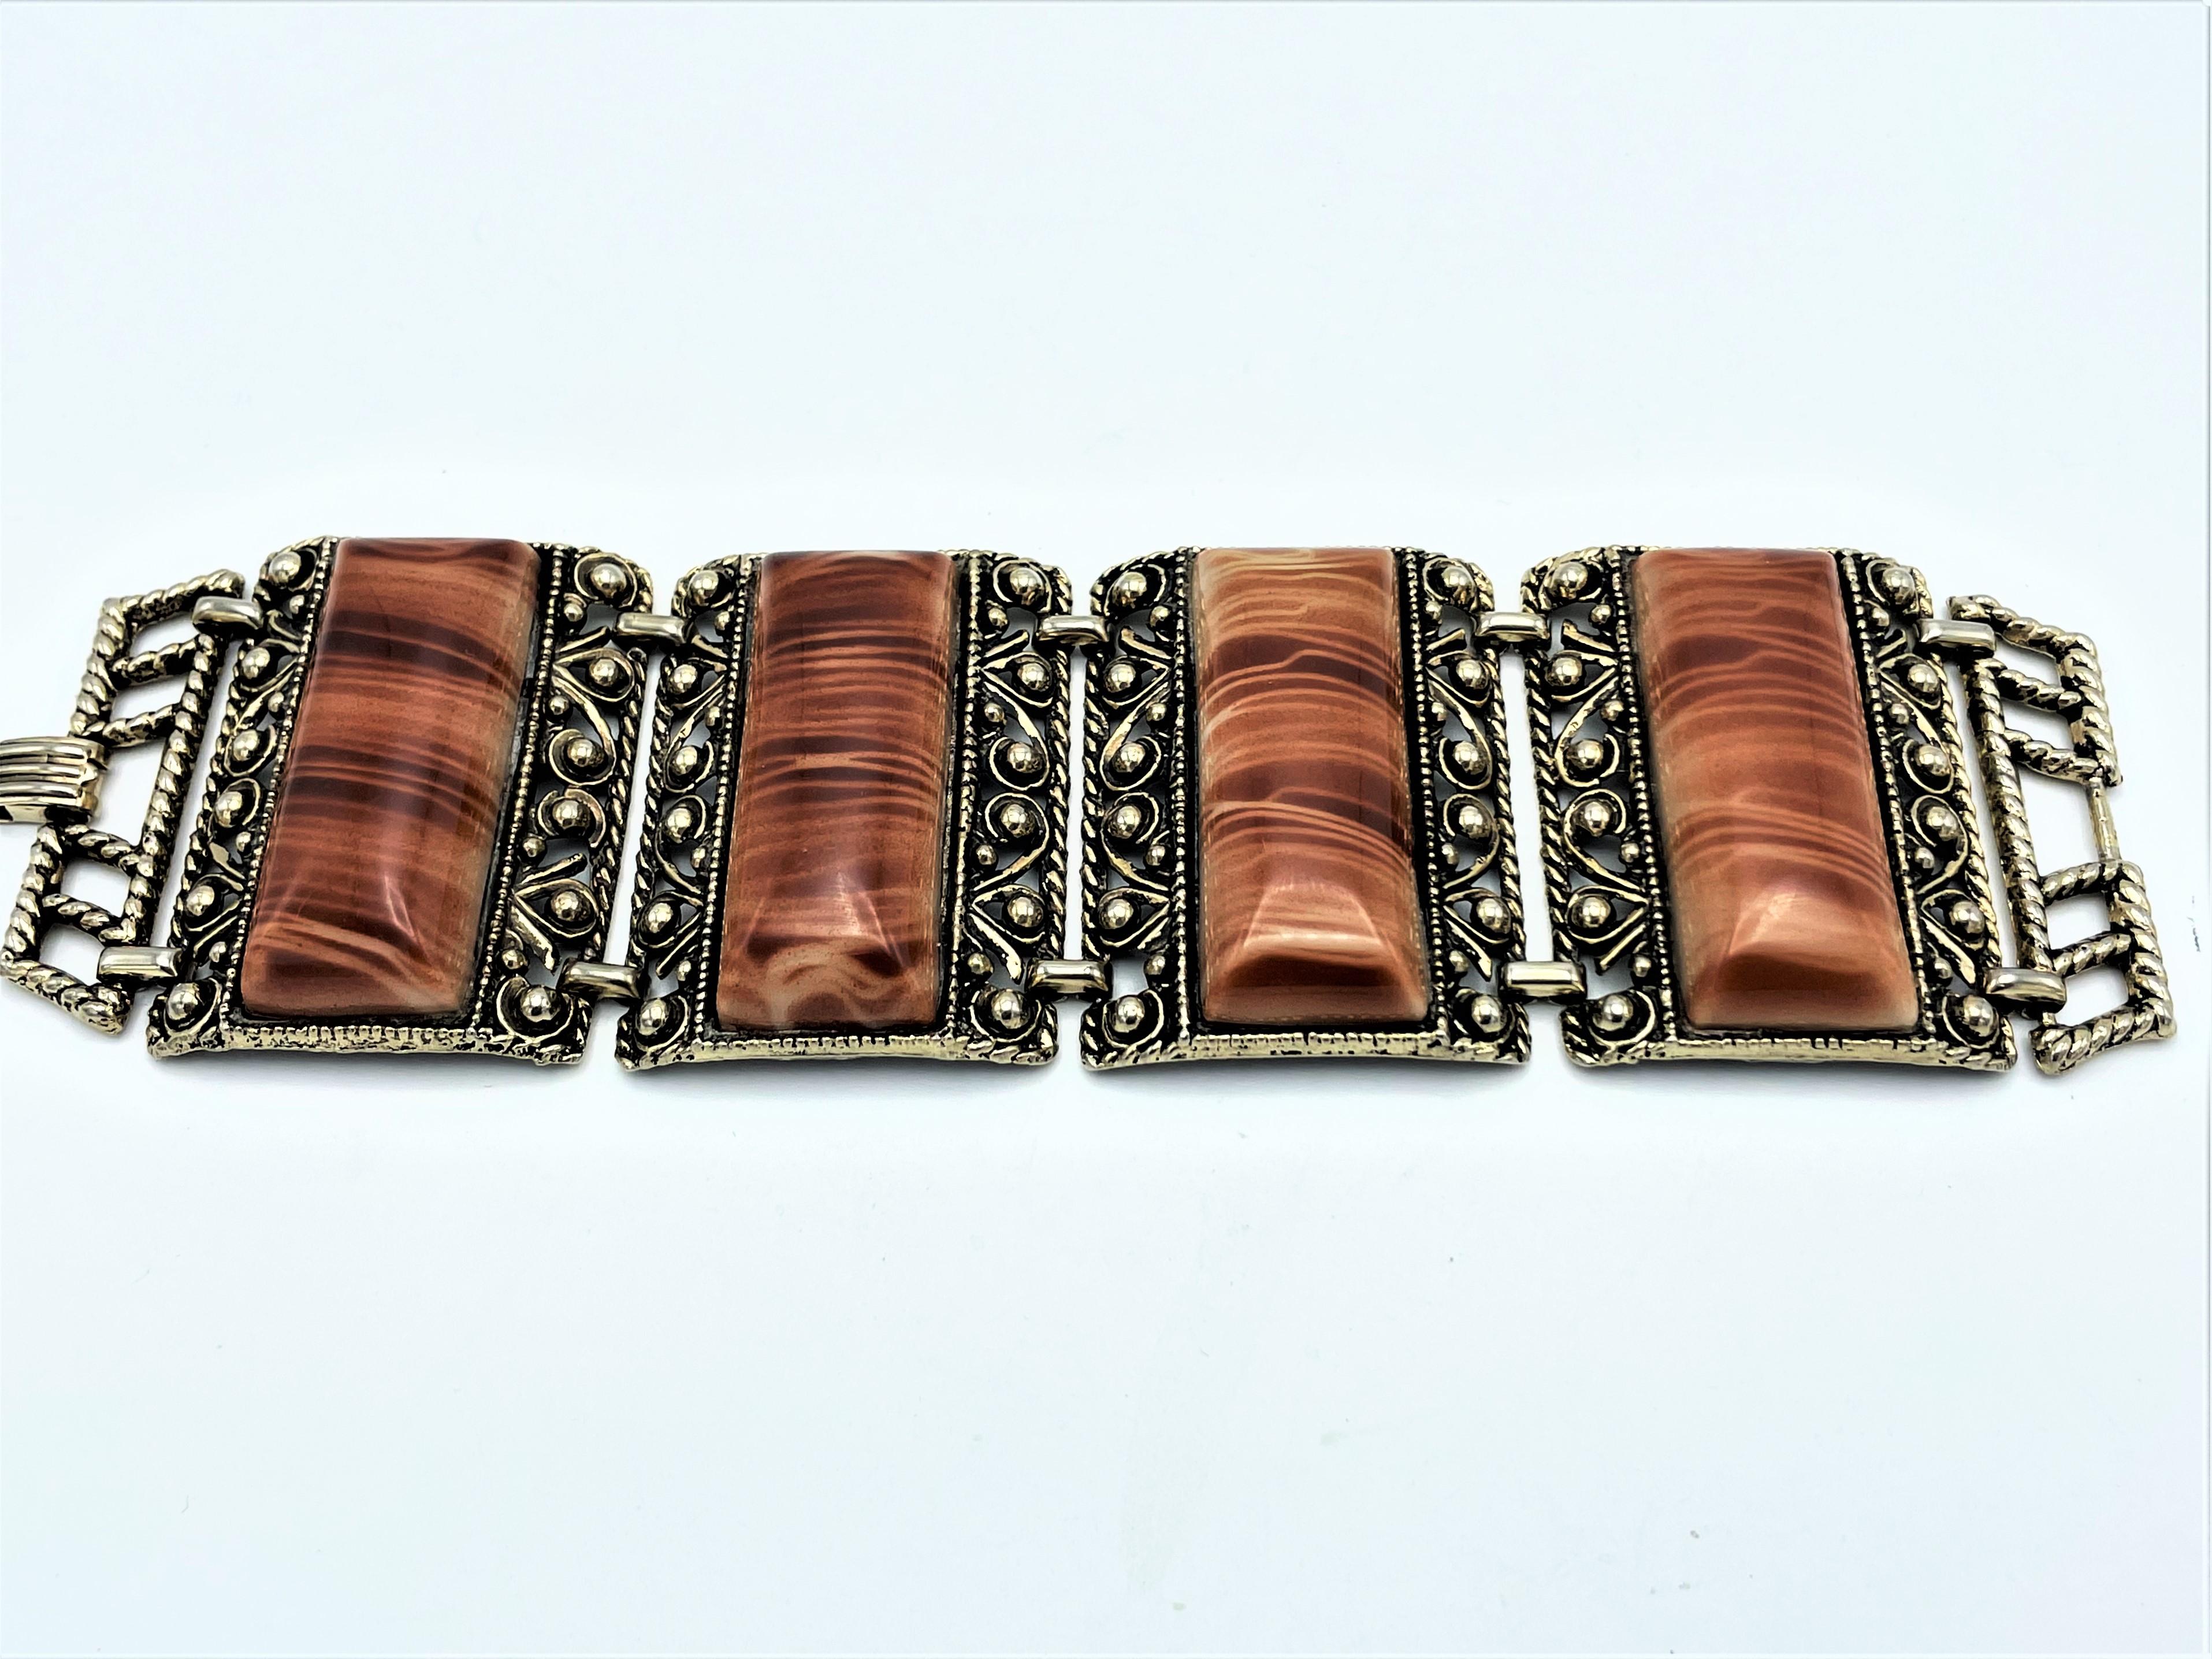  Bracelet consisting of 4 marbled plastic parts edged with fine metal, 1980s USA For Sale 1